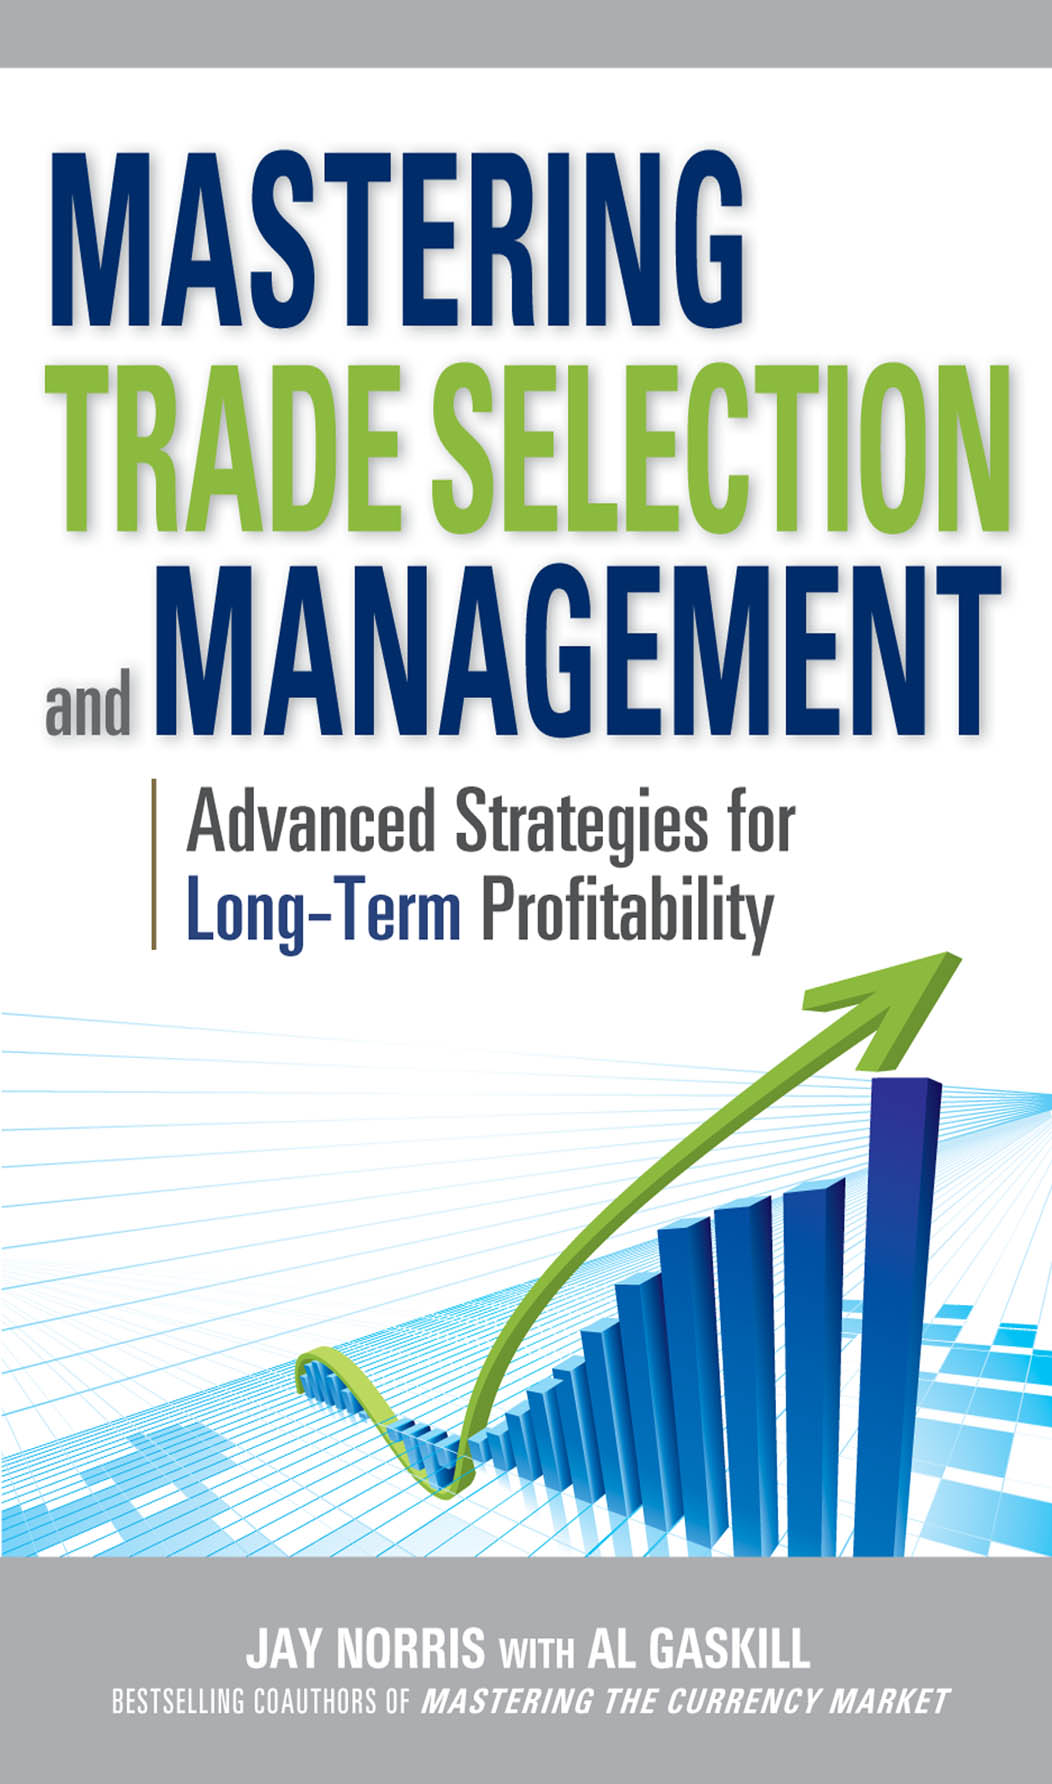 Mastering Trade Selection and Management